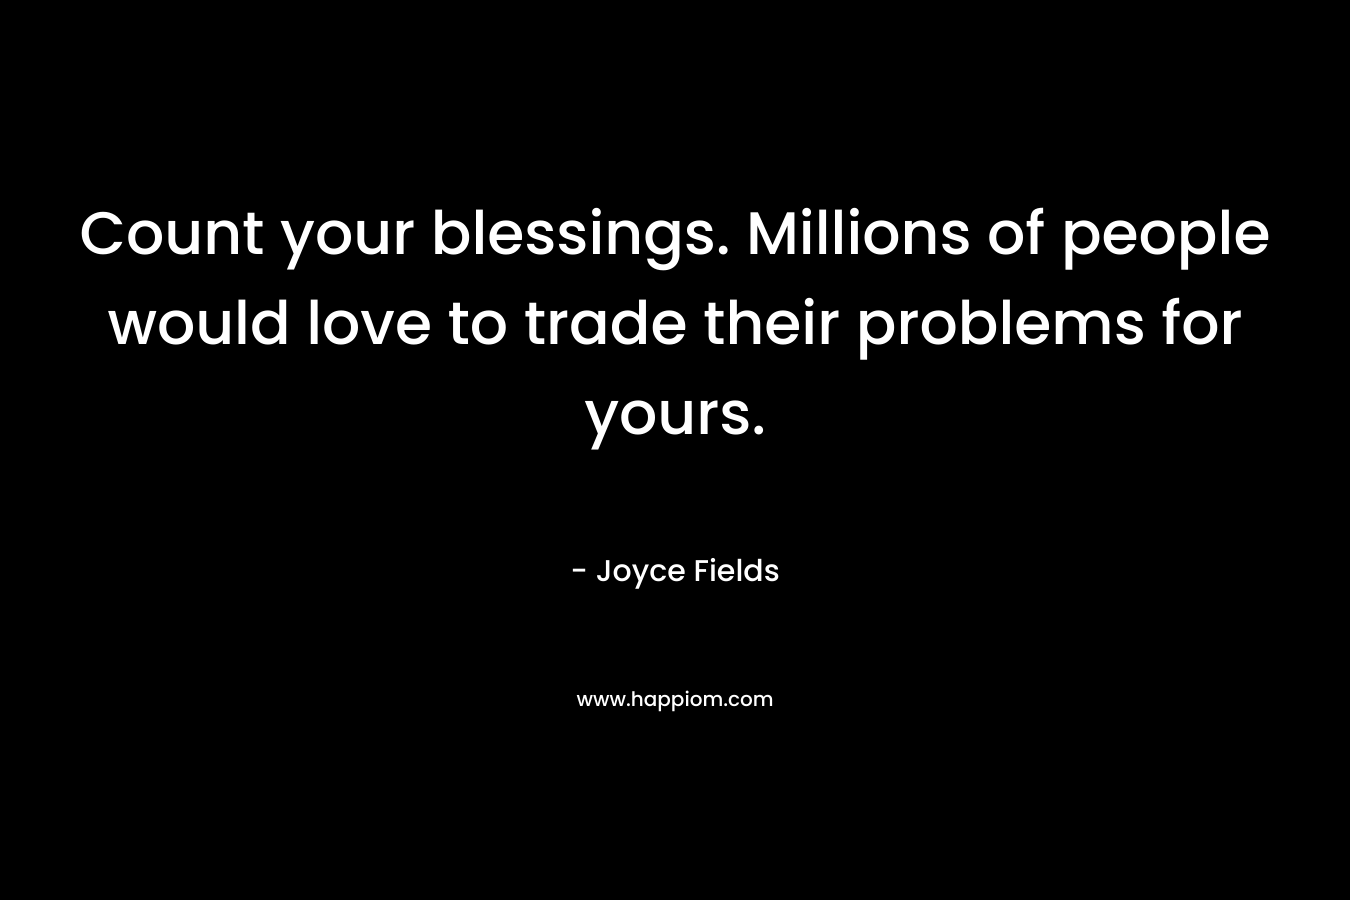 Count your blessings. Millions of people would love to trade their problems for yours. – Joyce Fields